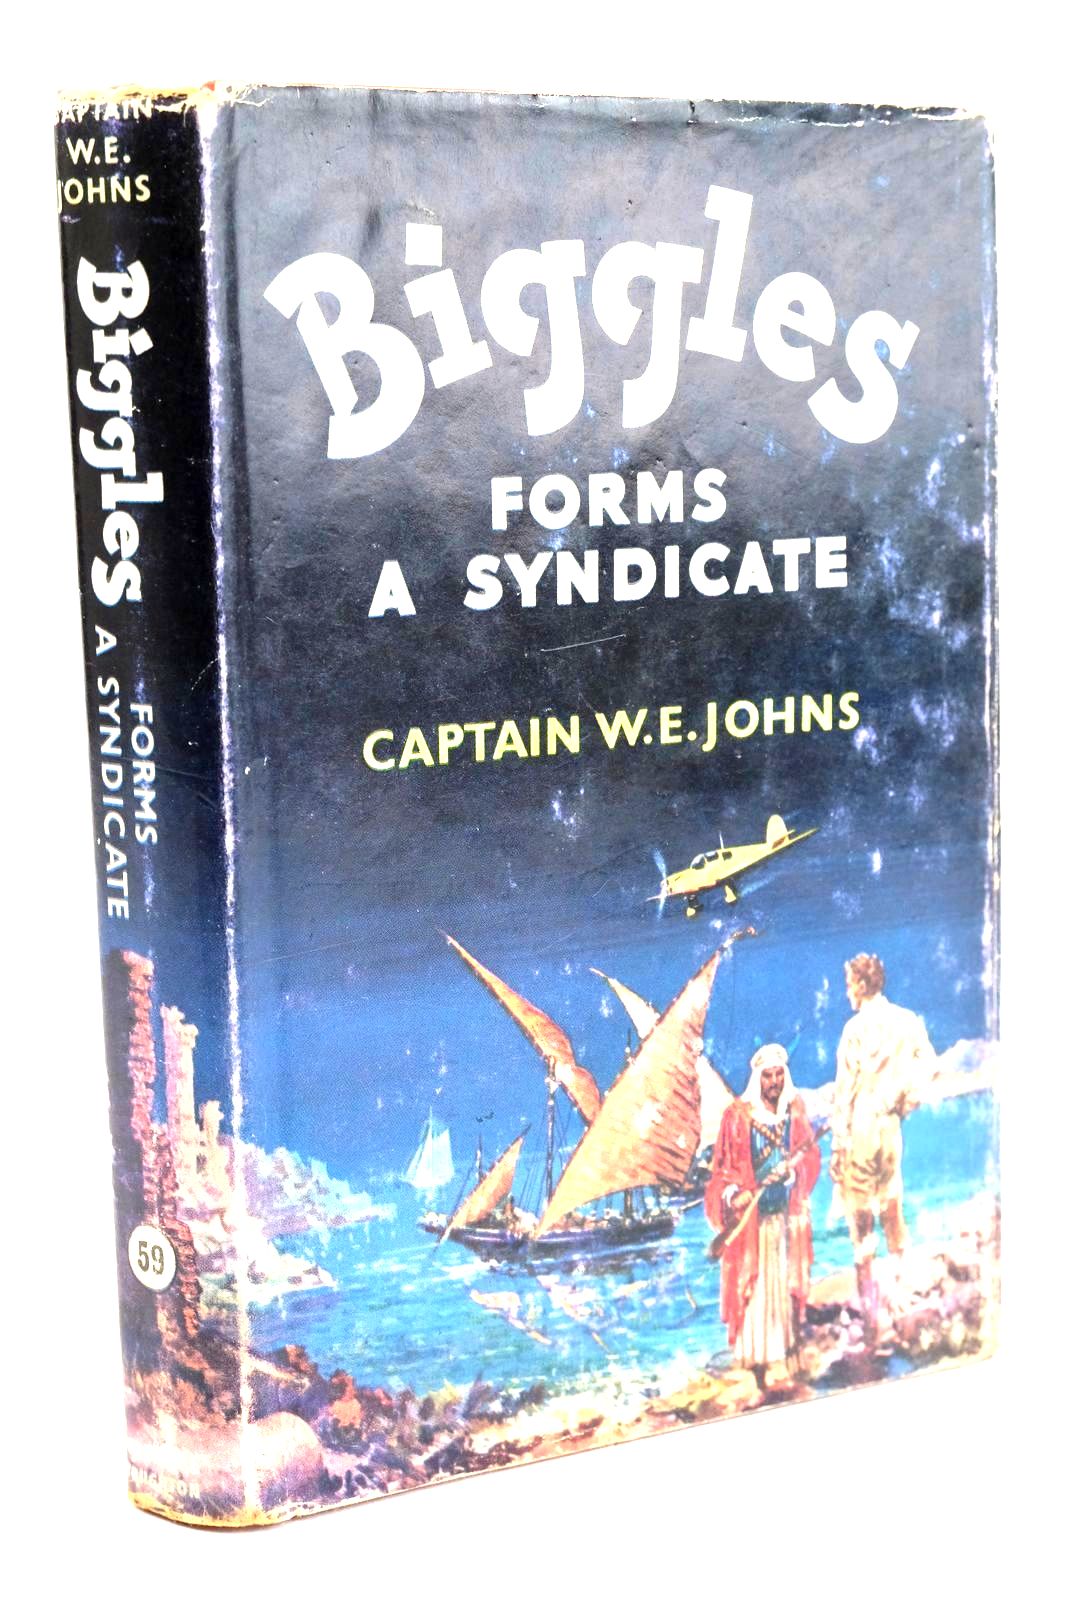 Photo of BIGGLES FORMS A SYNDICATE written by Johns, W.E. illustrated by Stead,  published by Hodder & Stoughton (STOCK CODE: 1324266)  for sale by Stella & Rose's Books